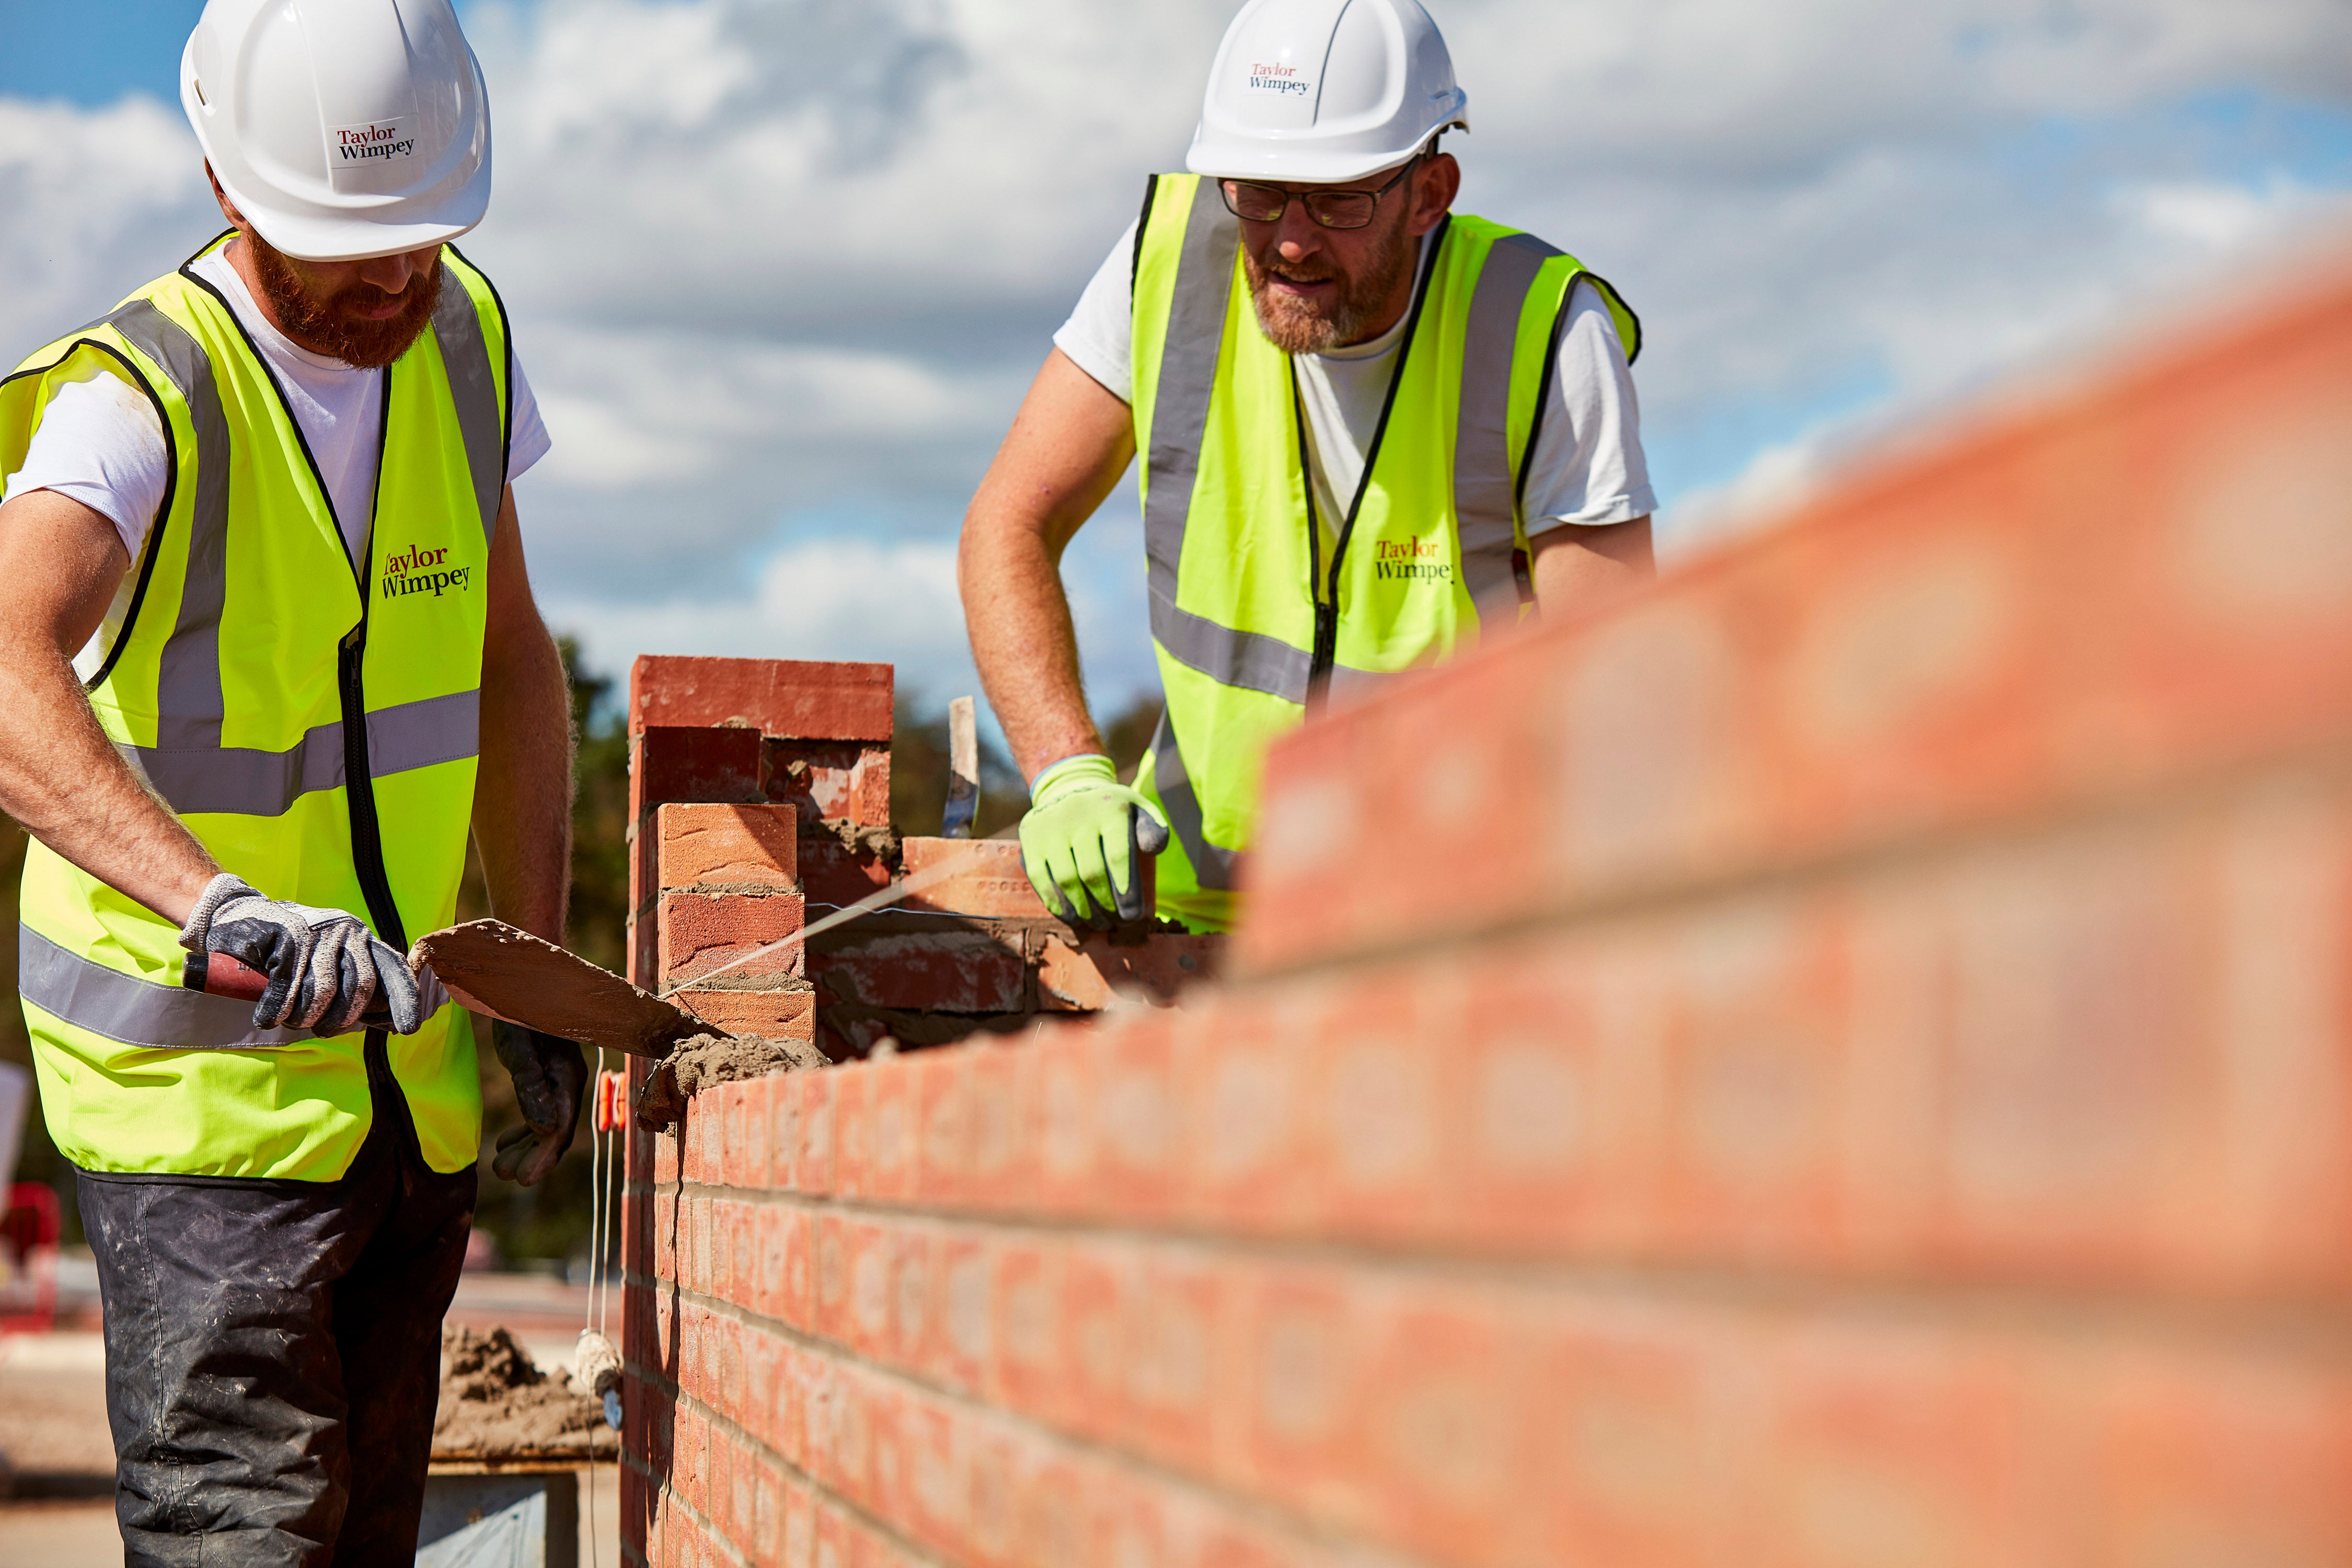 Apprenticeships are still looked on with stigma compared with a university degree, a survey has suggested (Taylor Wimpey/PA)